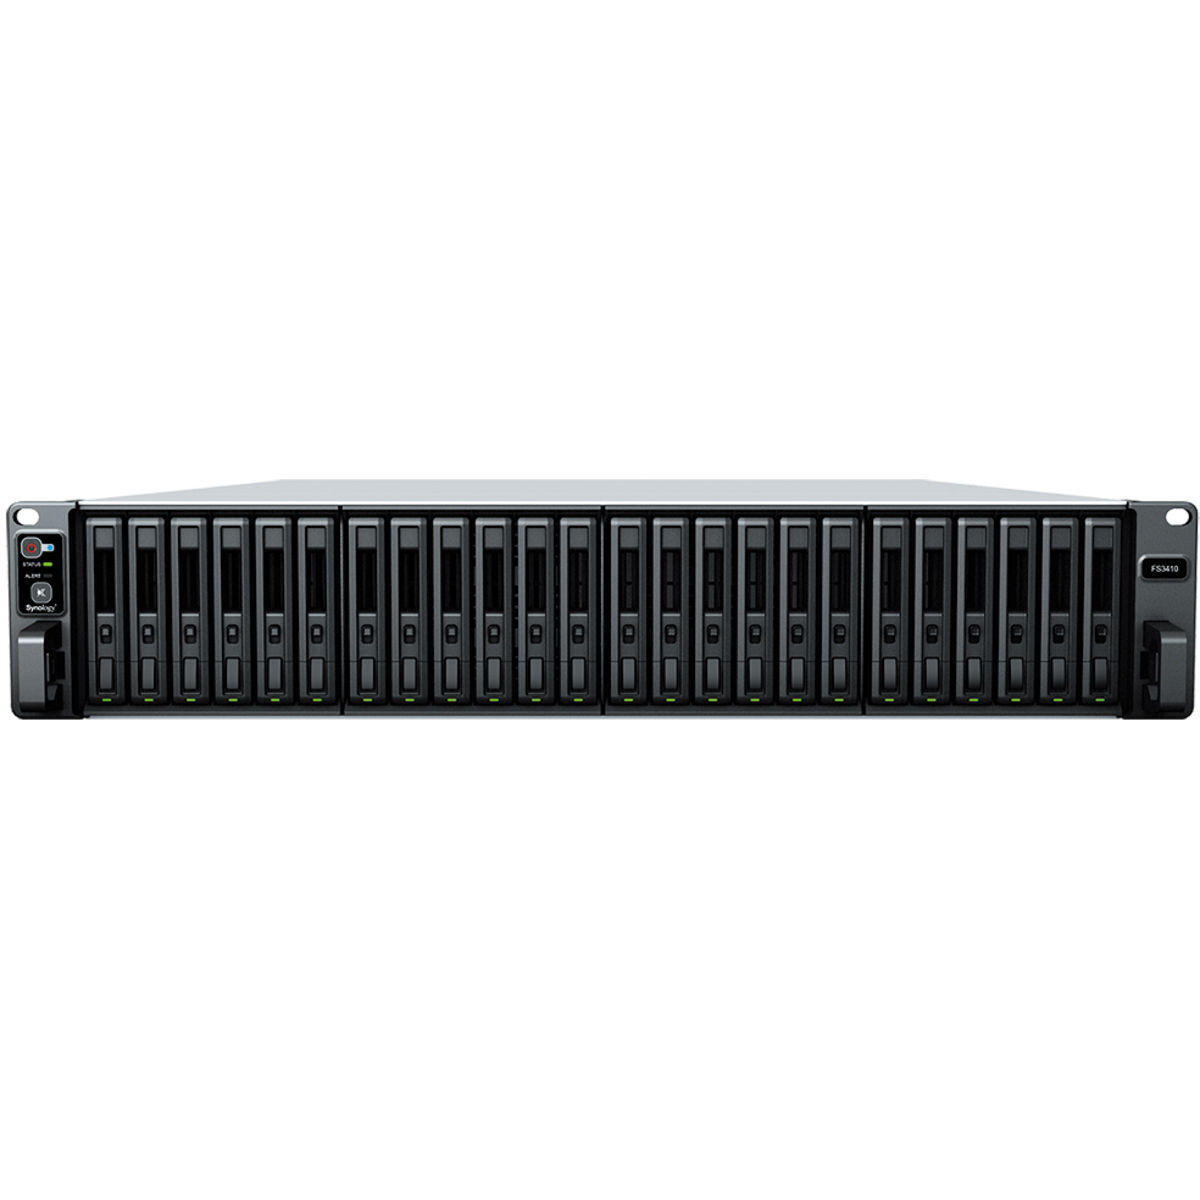 Synology FlashStation FS3410 21tb 24-Bay RackMount Large Business / Enterprise NAS - Network Attached Storage Device 21x1tb Sandisk Ultra 3D SDSSDH3-1T00 2.5 560/520MB/s SATA 6Gb/s SSD CONSUMER Class Drives Installed - Burn-In Tested FlashStation FS3410